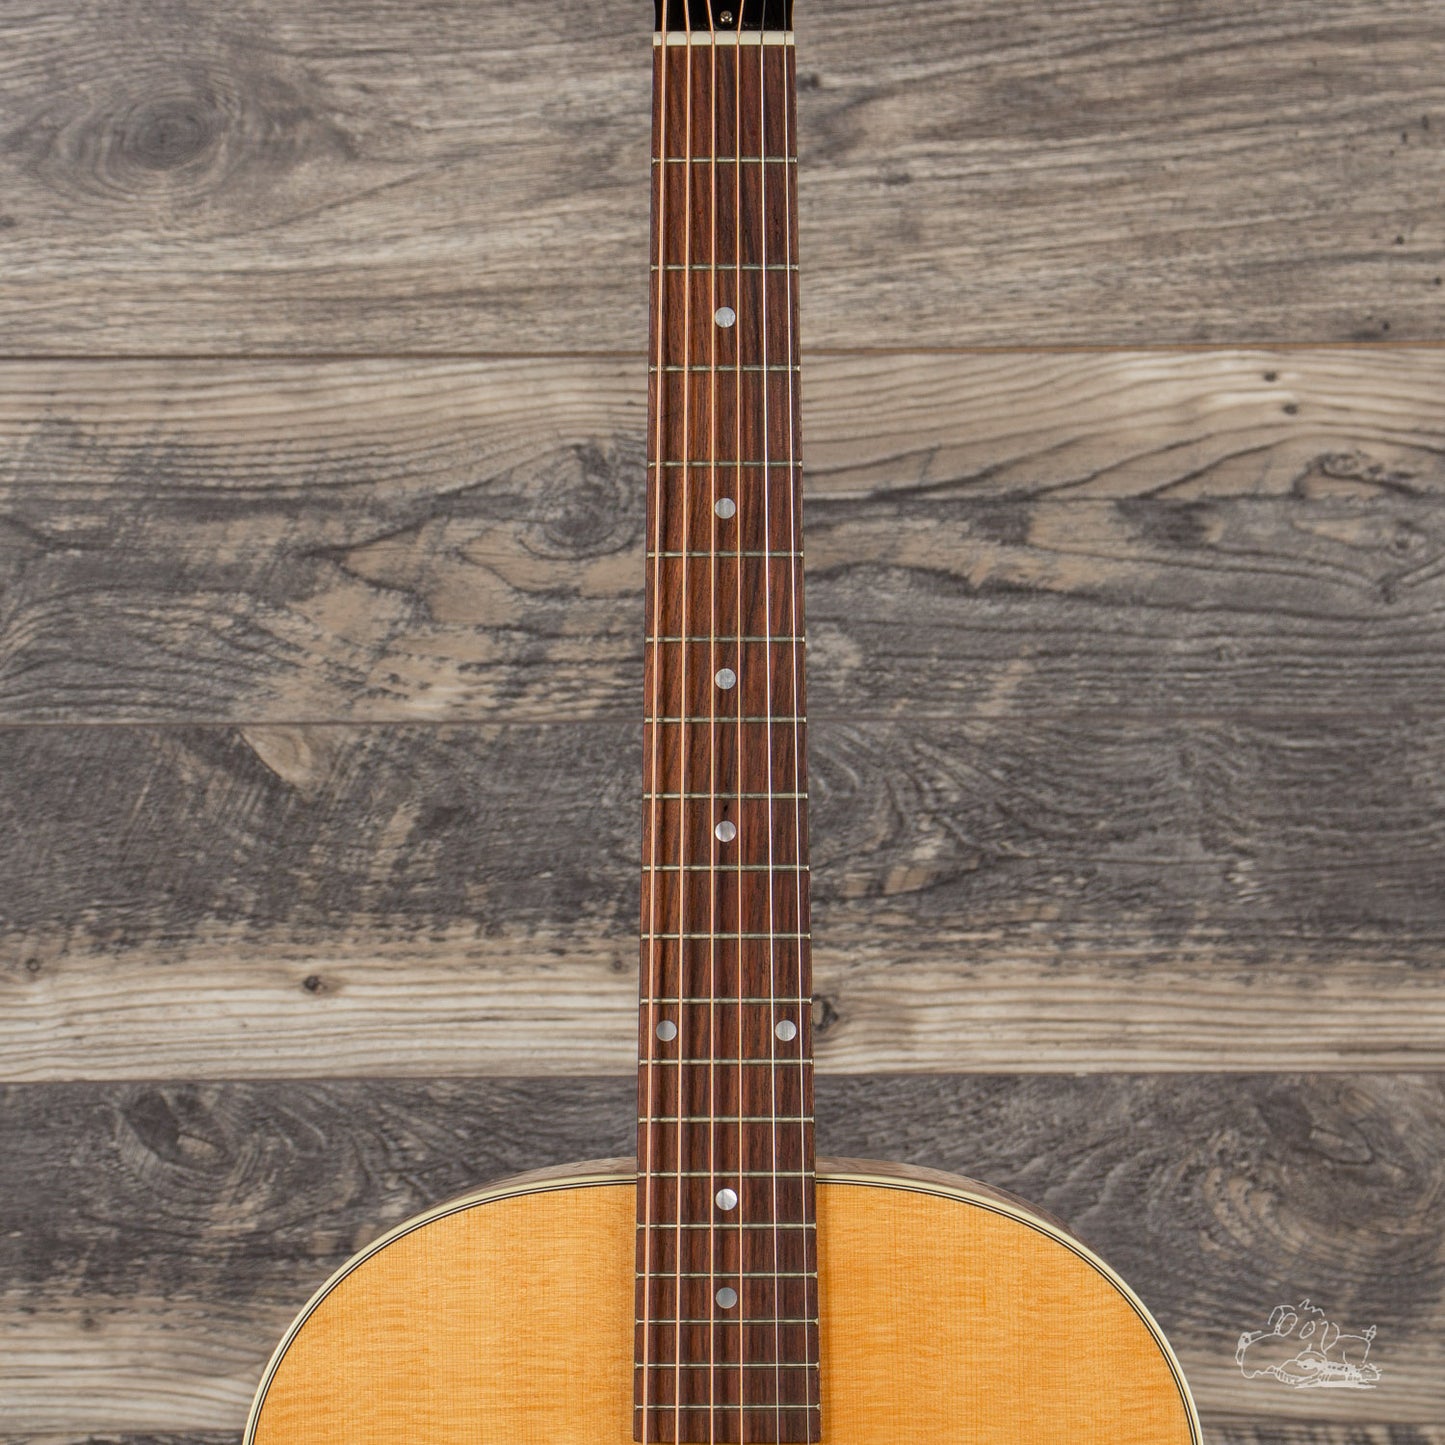 2013 Gibson J-35 w/ Spruce Top and Mahogany Back & Sides